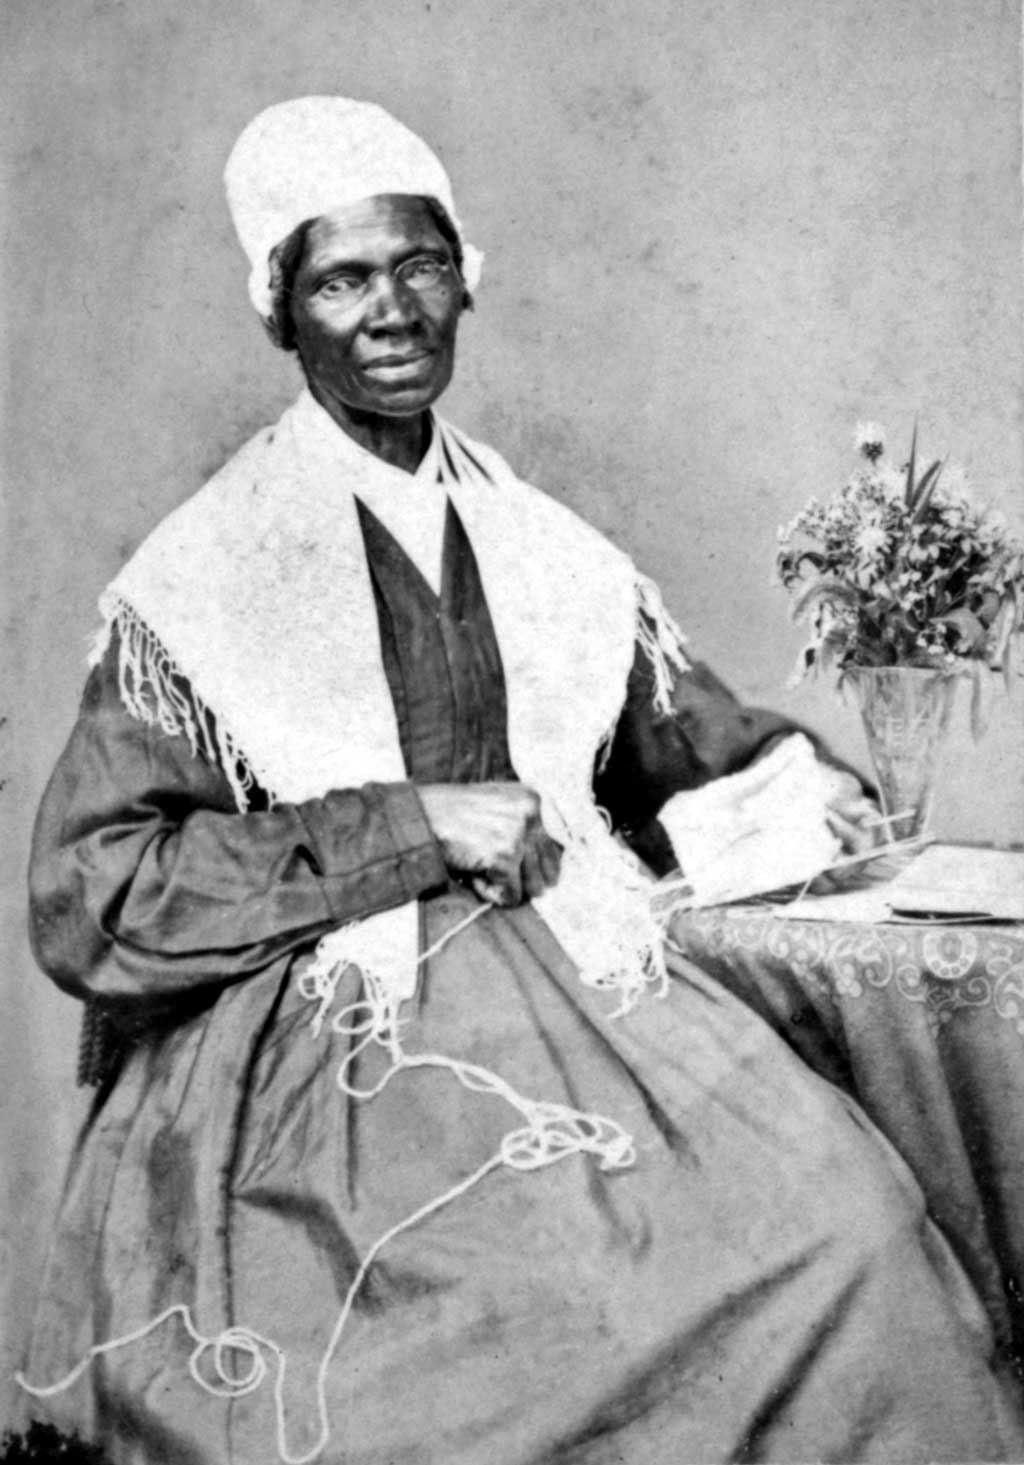 Photograph of Sojourner Truth in 1864